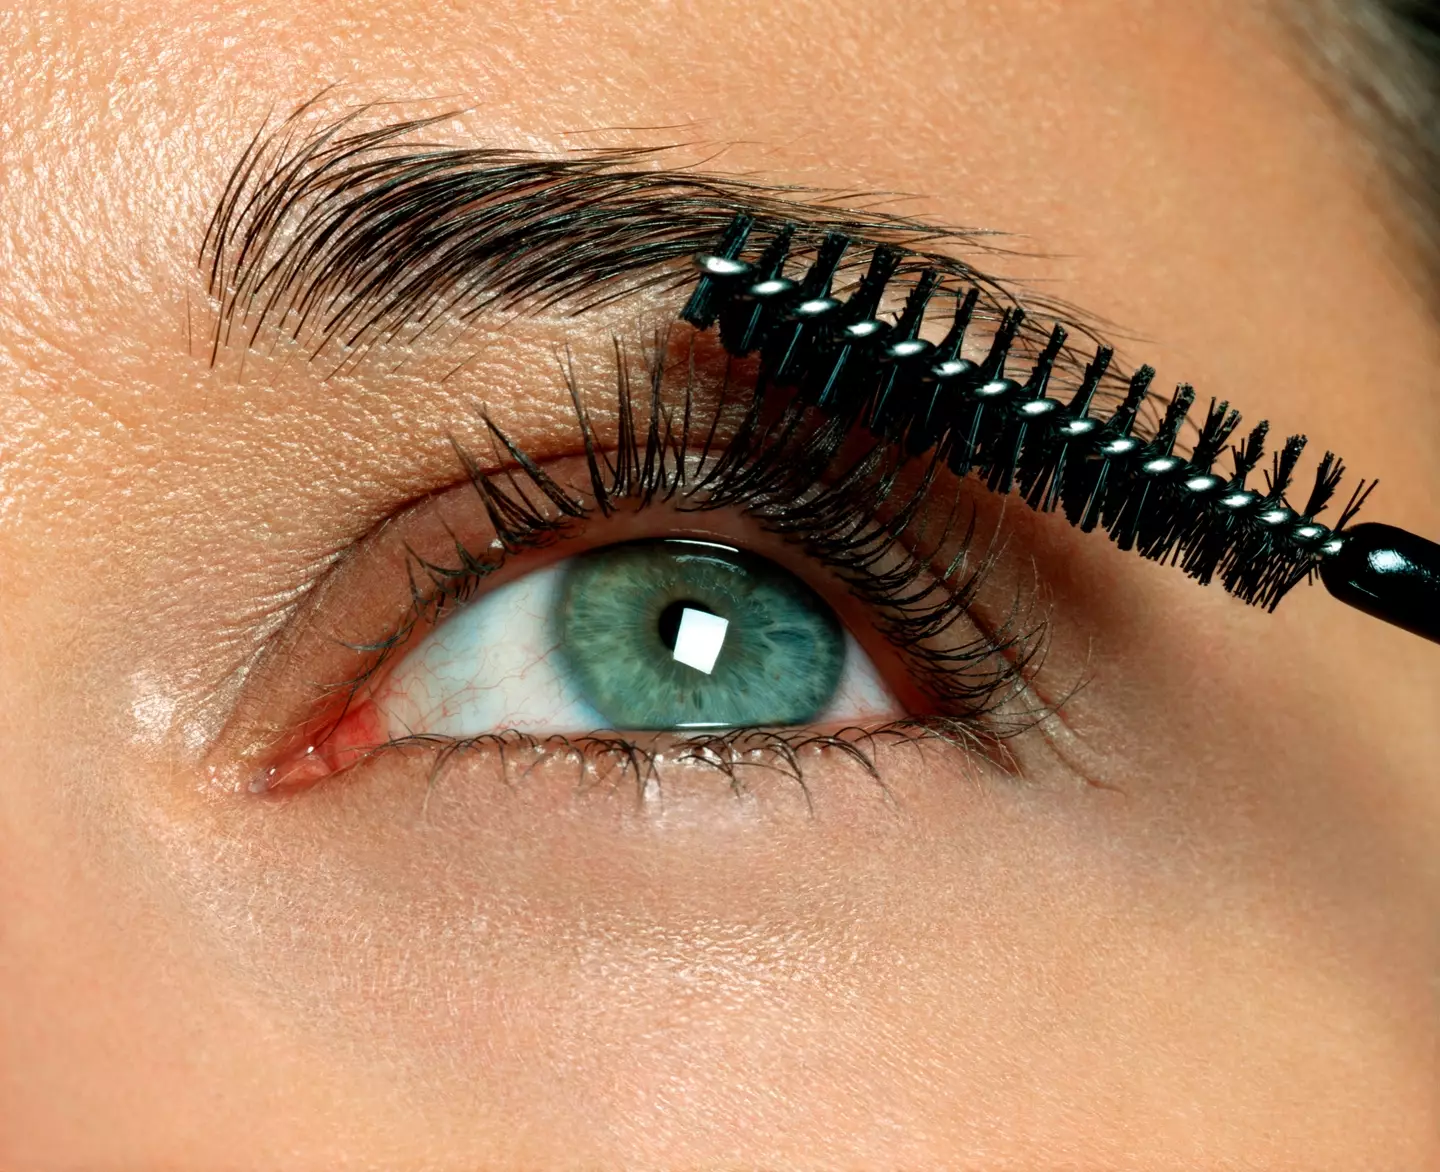 For many of us, mascara is an everyday makeup product.